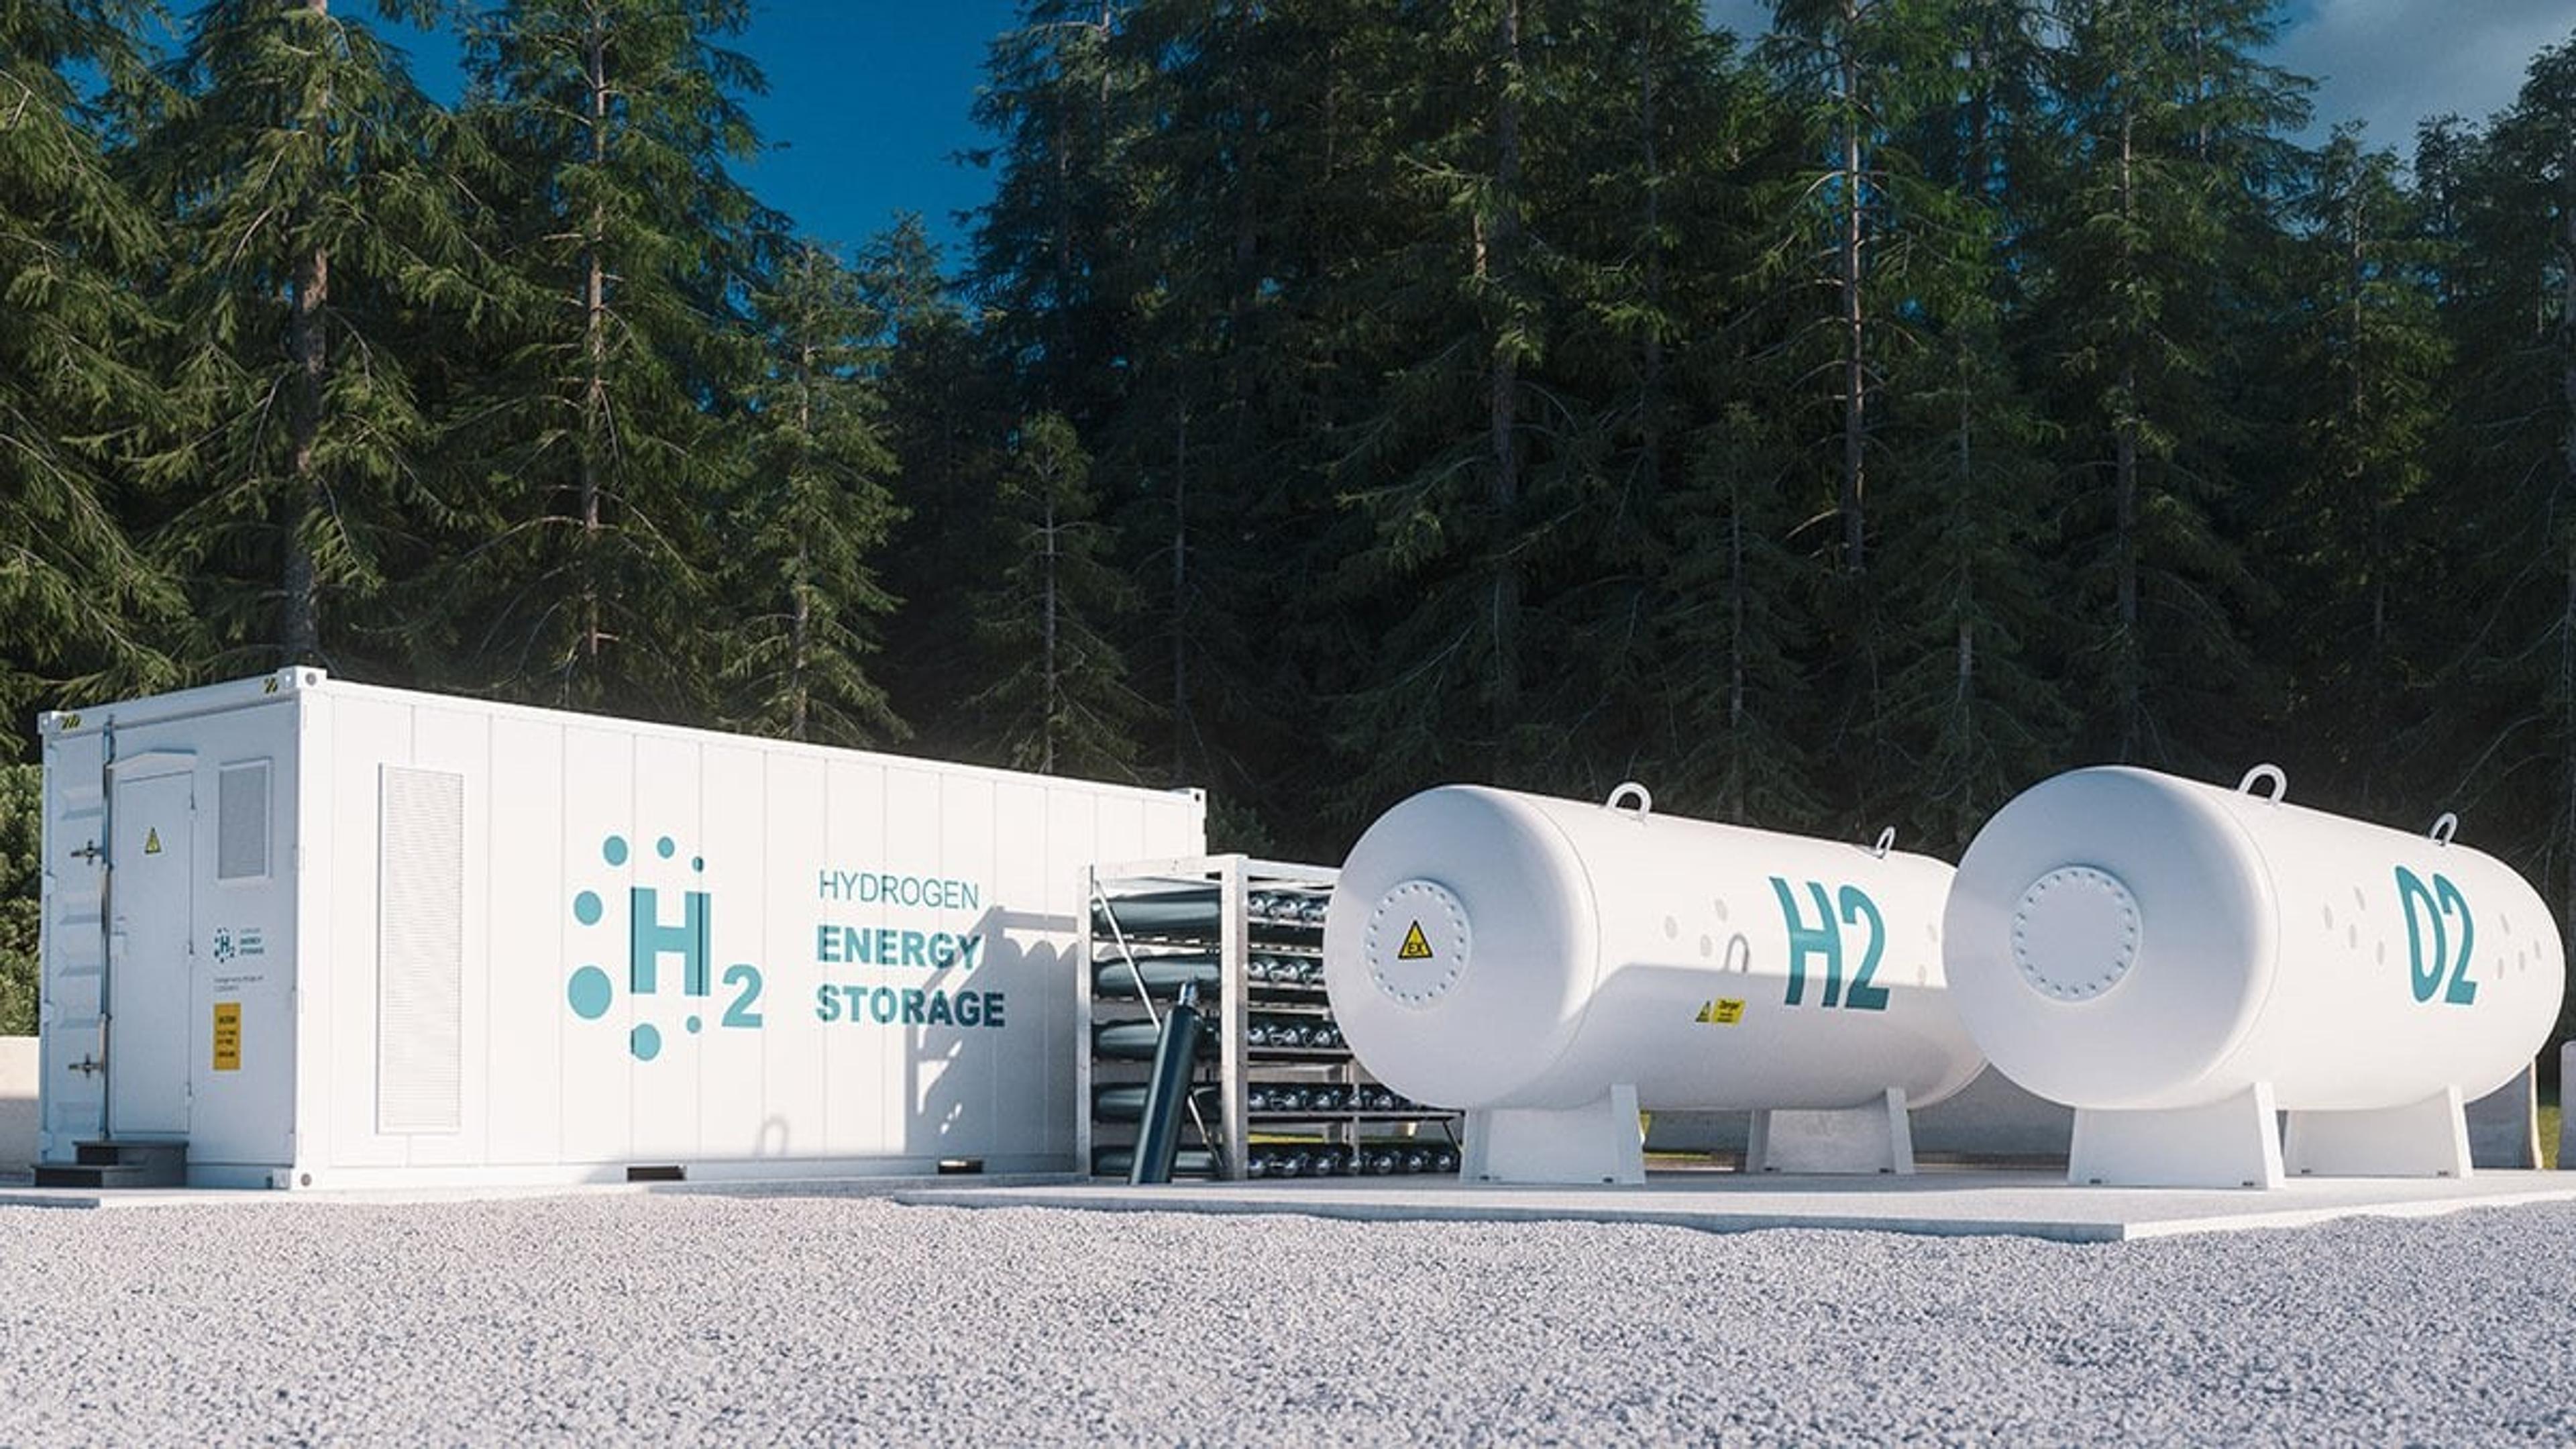 Containere med hydrogen